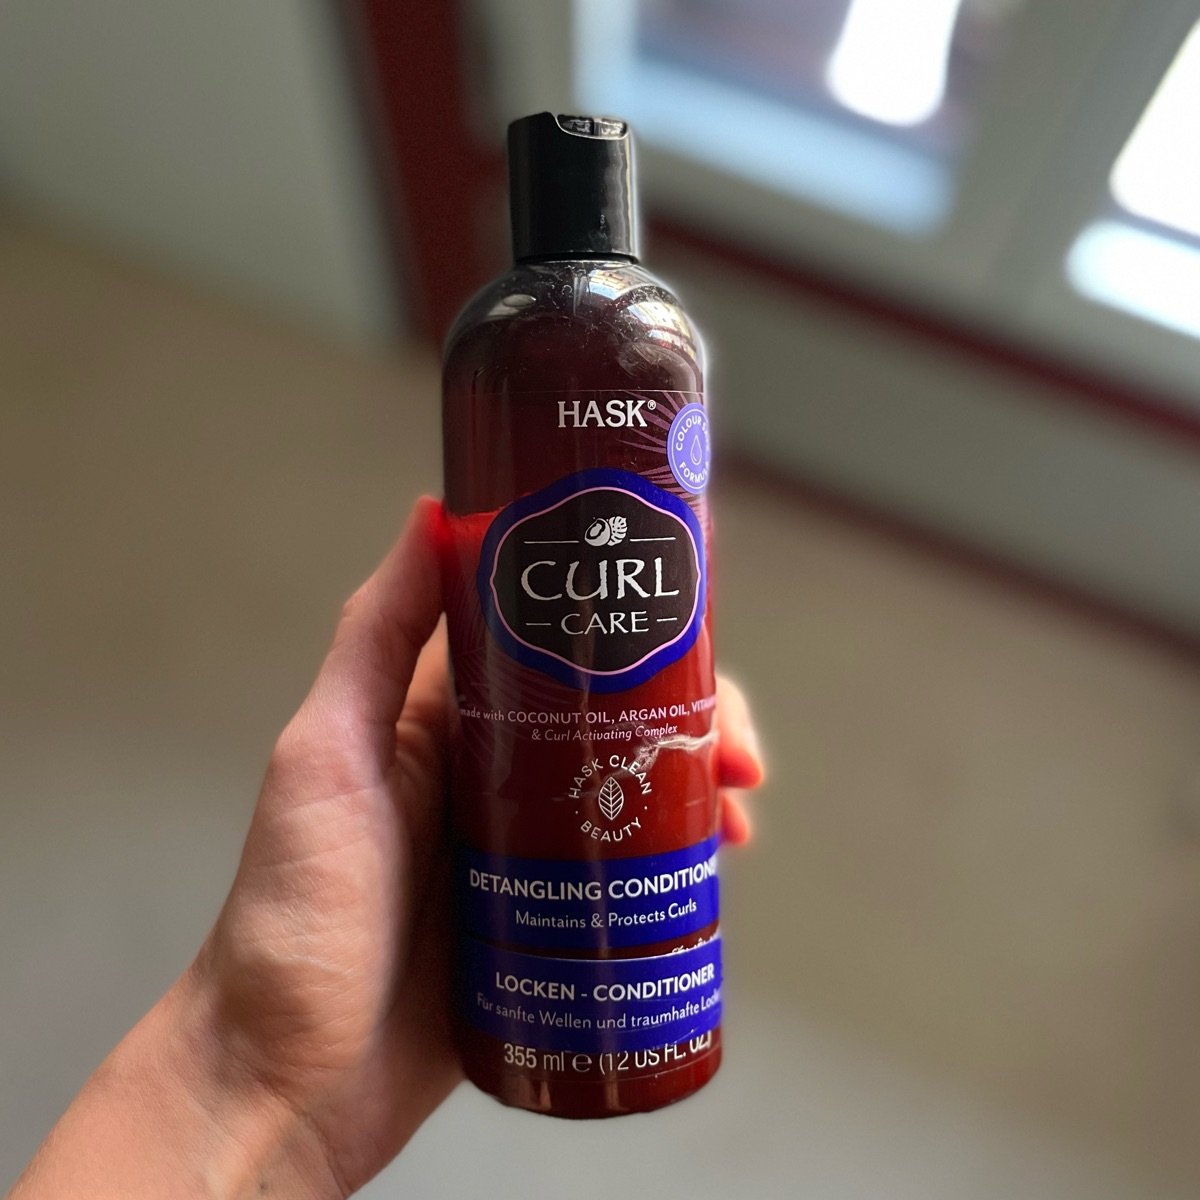 HASK Curl Care Detangling Conditioner Reviews | abillion